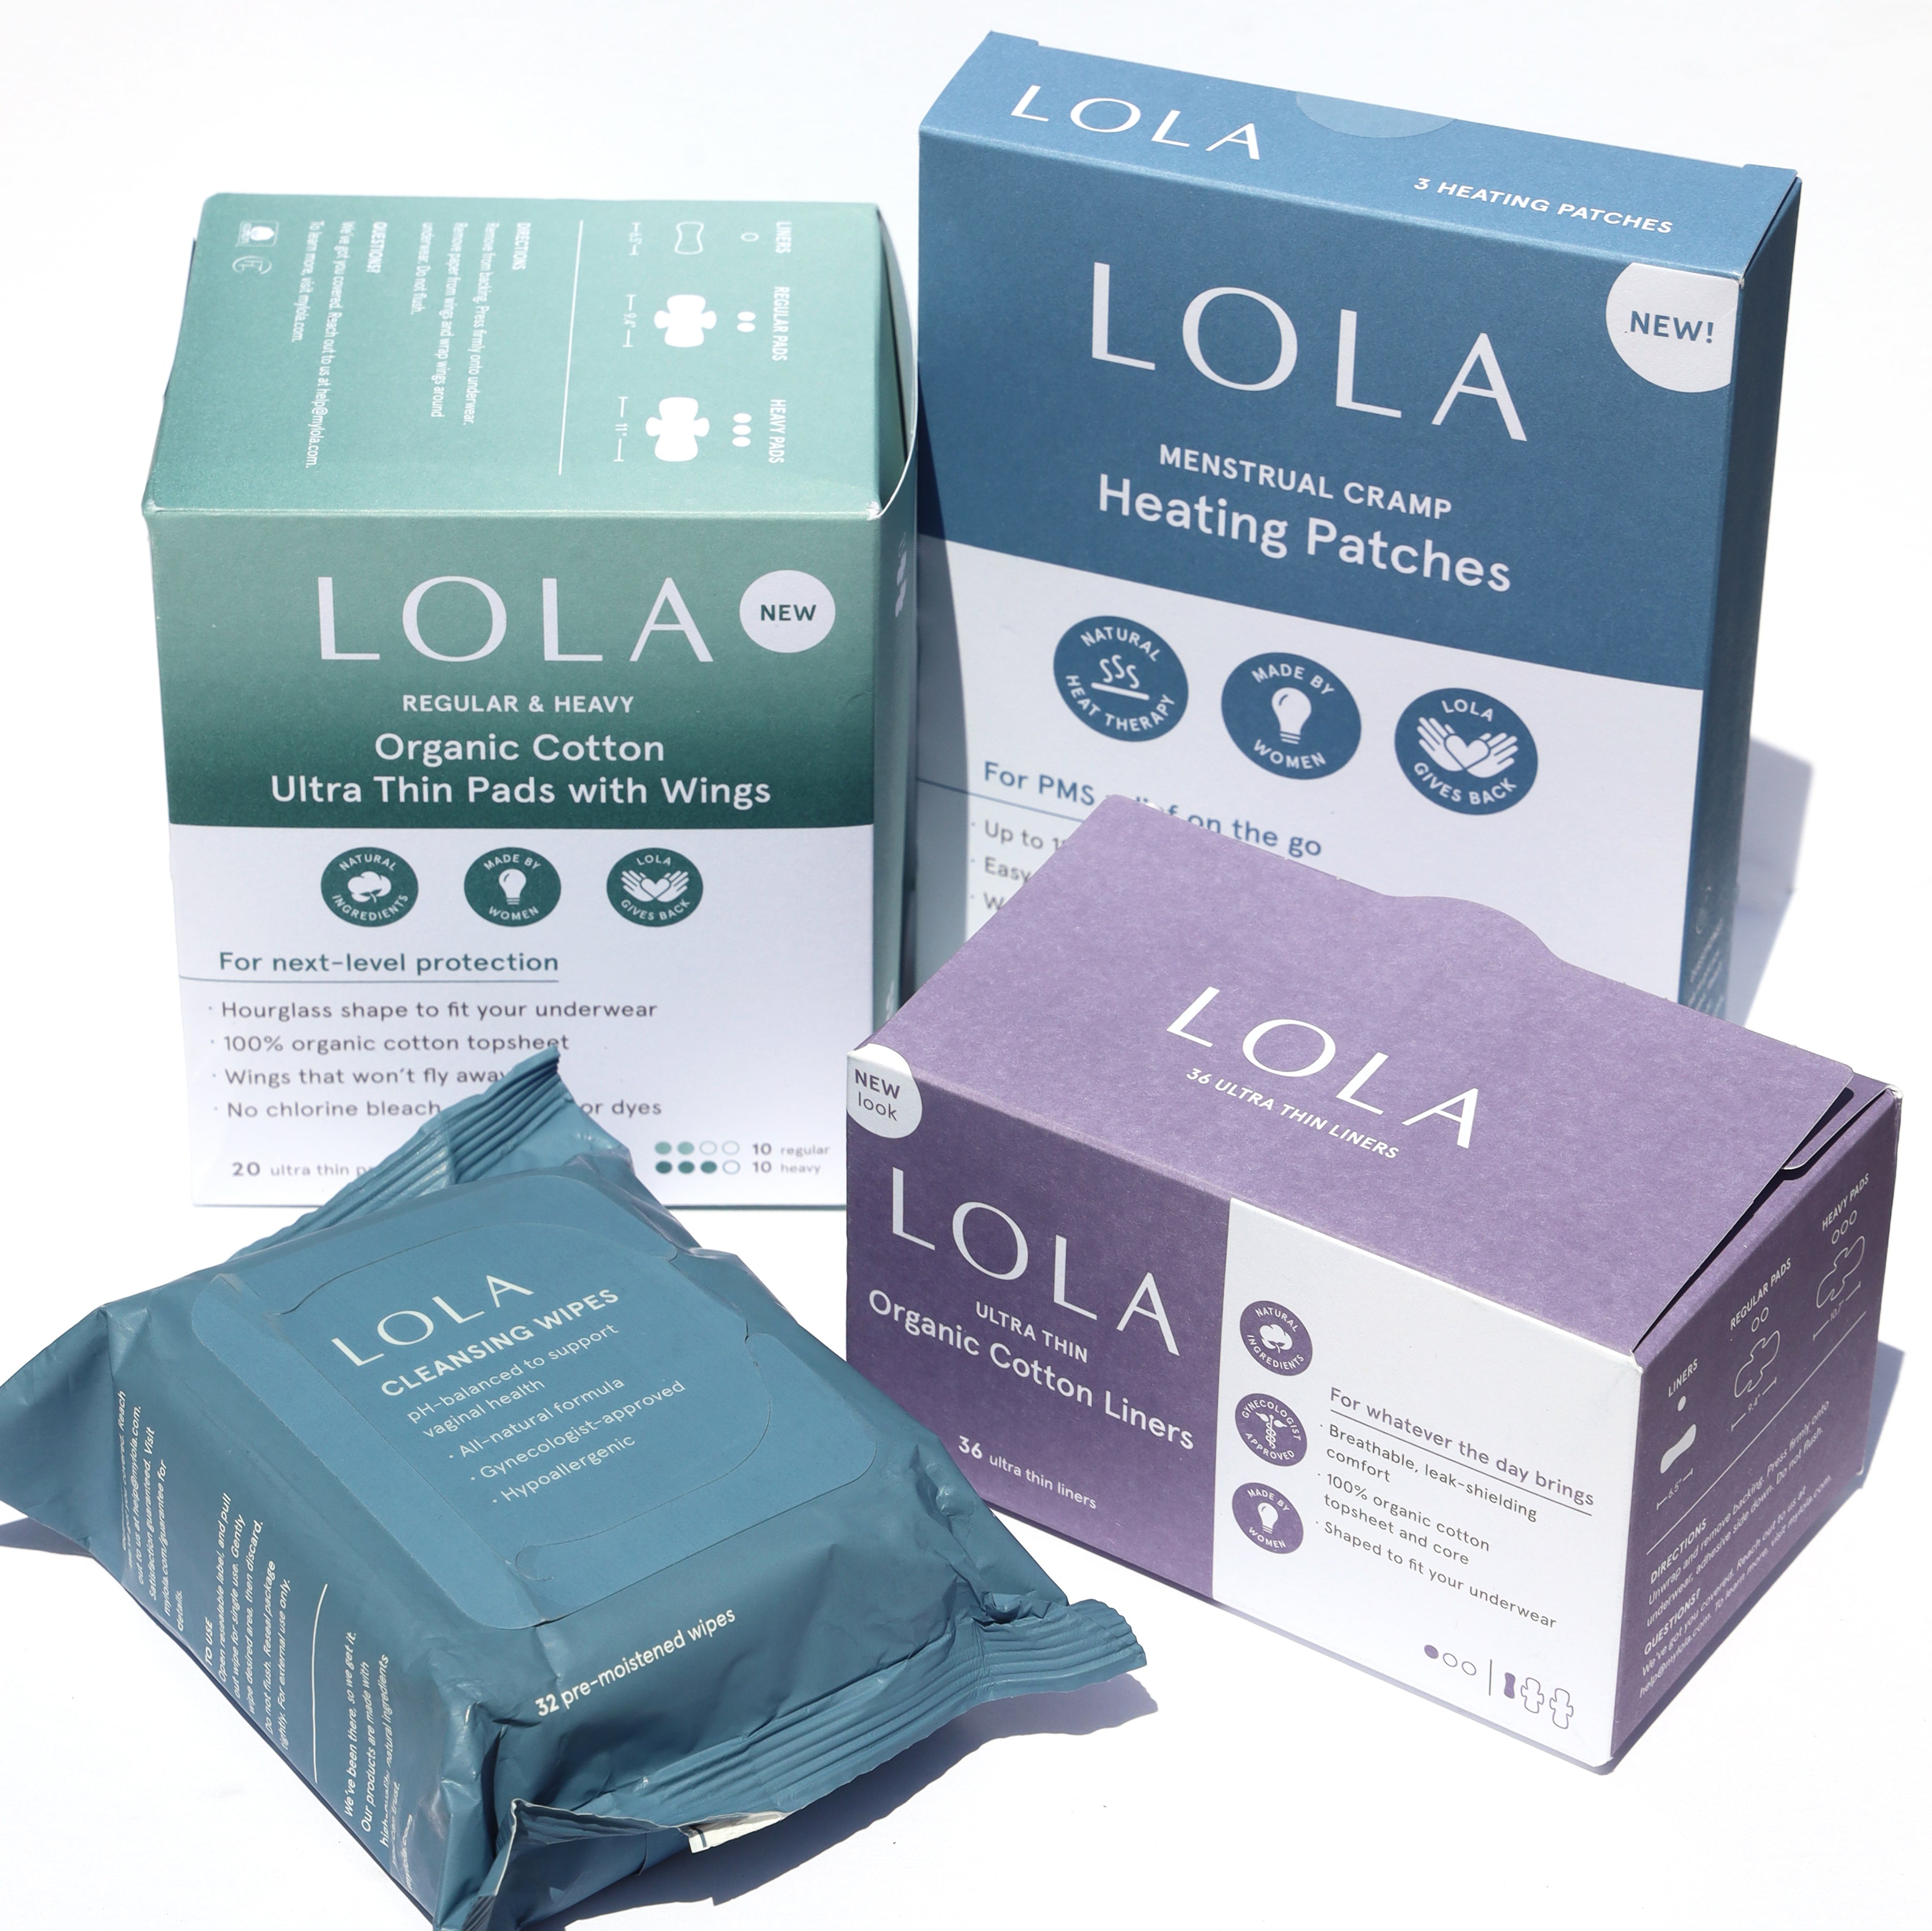 About LOLA  Organic Tampons & Feminine Care Products